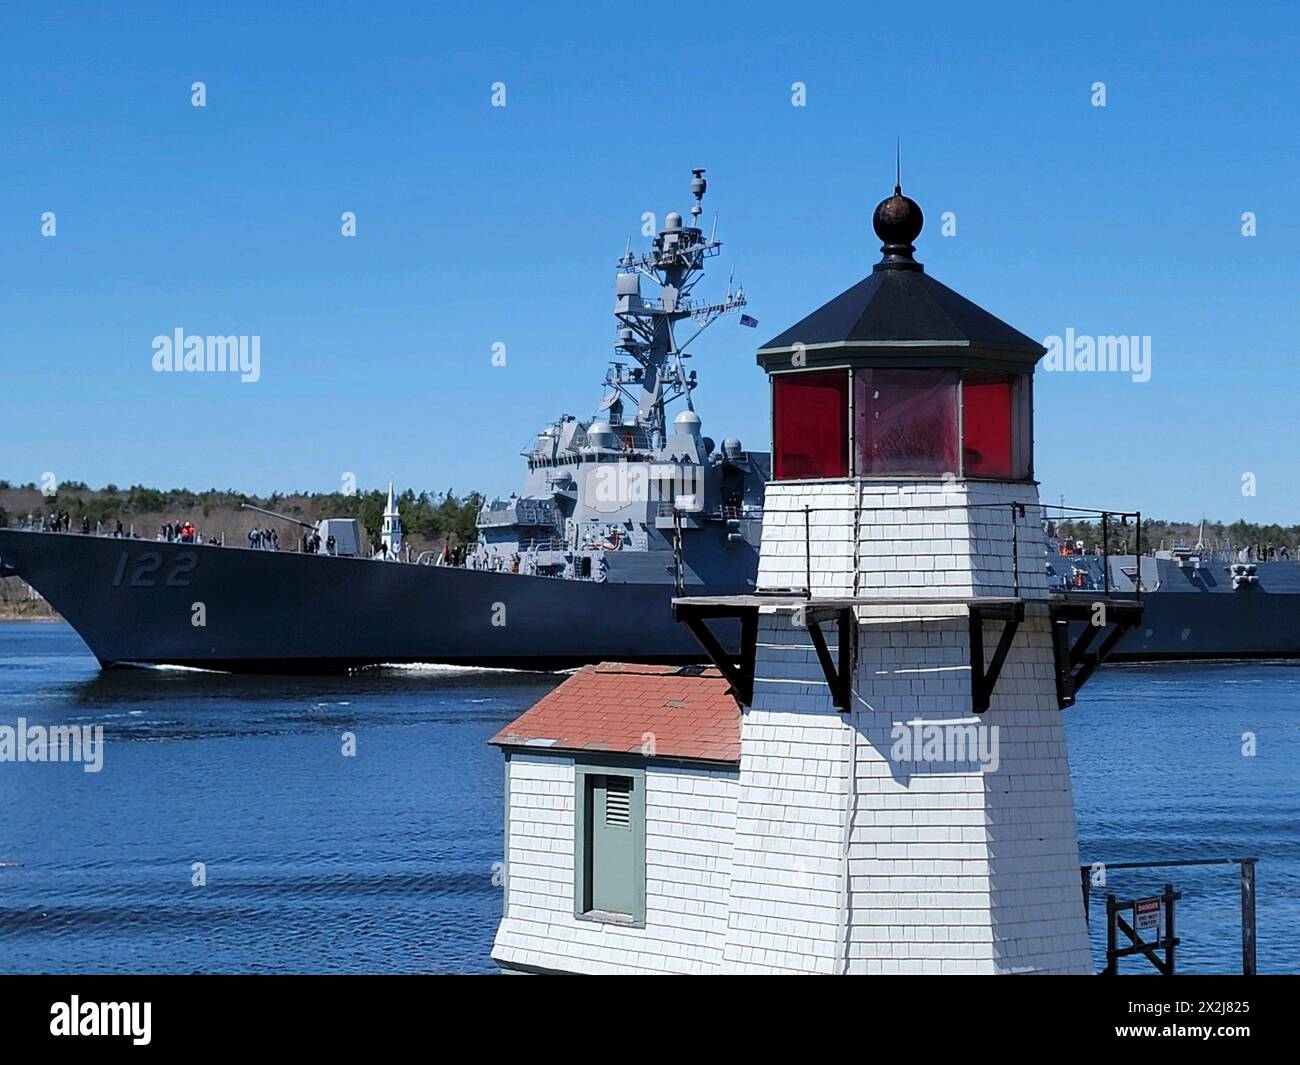 Arrowsic, United States. 08 April, 2024. The U.S. Navy Arleigh Burke-class guided-missile destroyer USS John Basilone transits the Kennebec River past Squirrel Point Light on the way to the Atlantic Ocean to conduct four-days of sea trials, April 8, 2024 in Arrowsic, Maine.  Credit: CPO Sherwin Thomas/U.S. Navy Photo/Alamy Live News Stock Photo